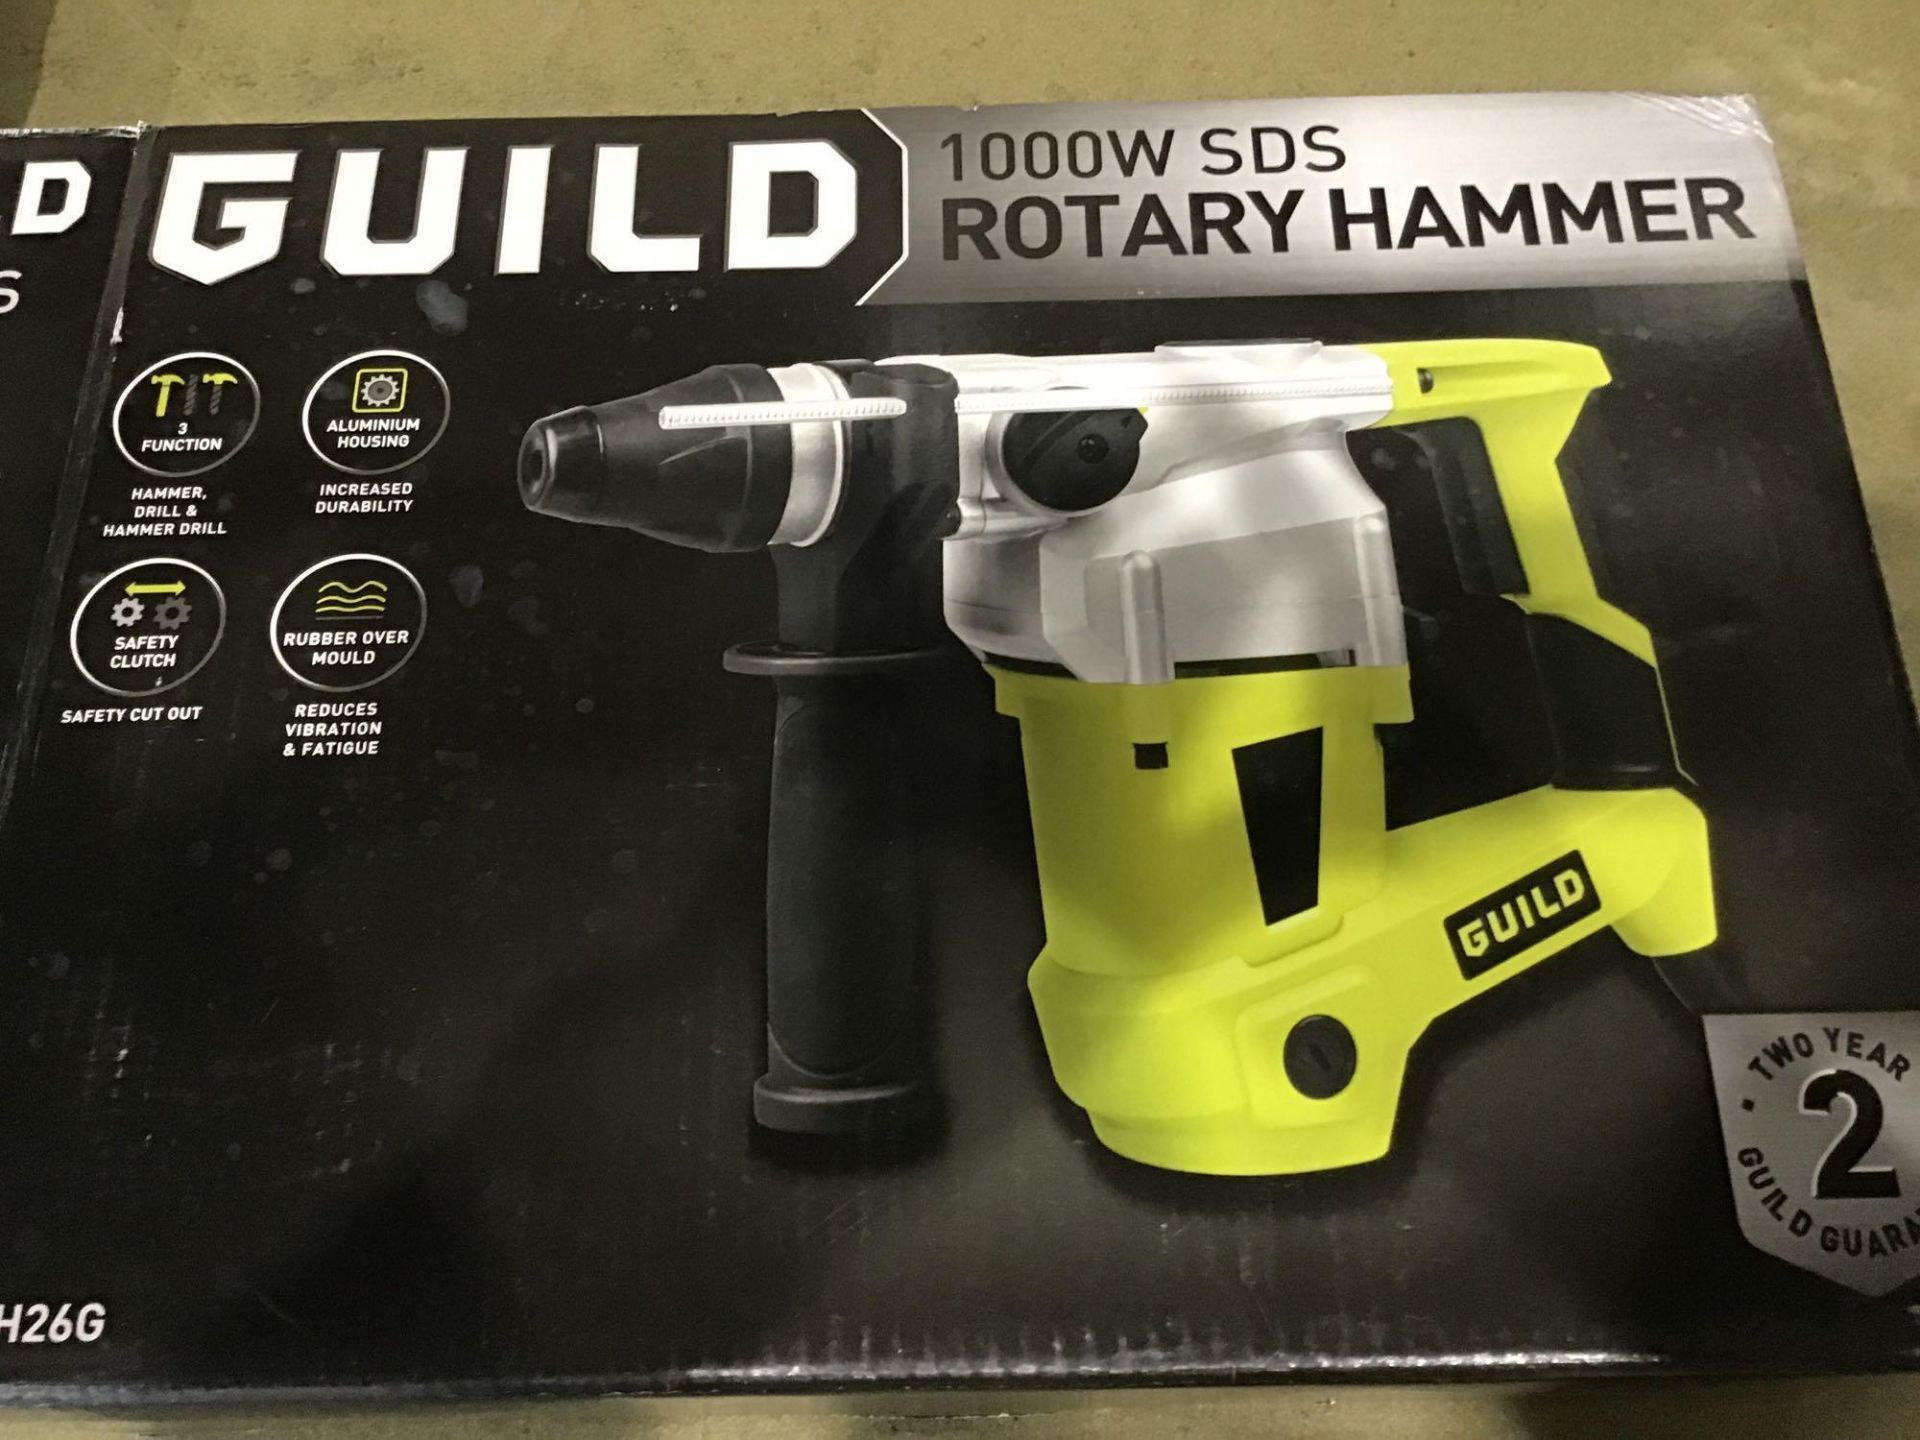 Guild Corded SDS Rotary Hammer Drill - 1000W - £50.00 RRP - Image 2 of 3